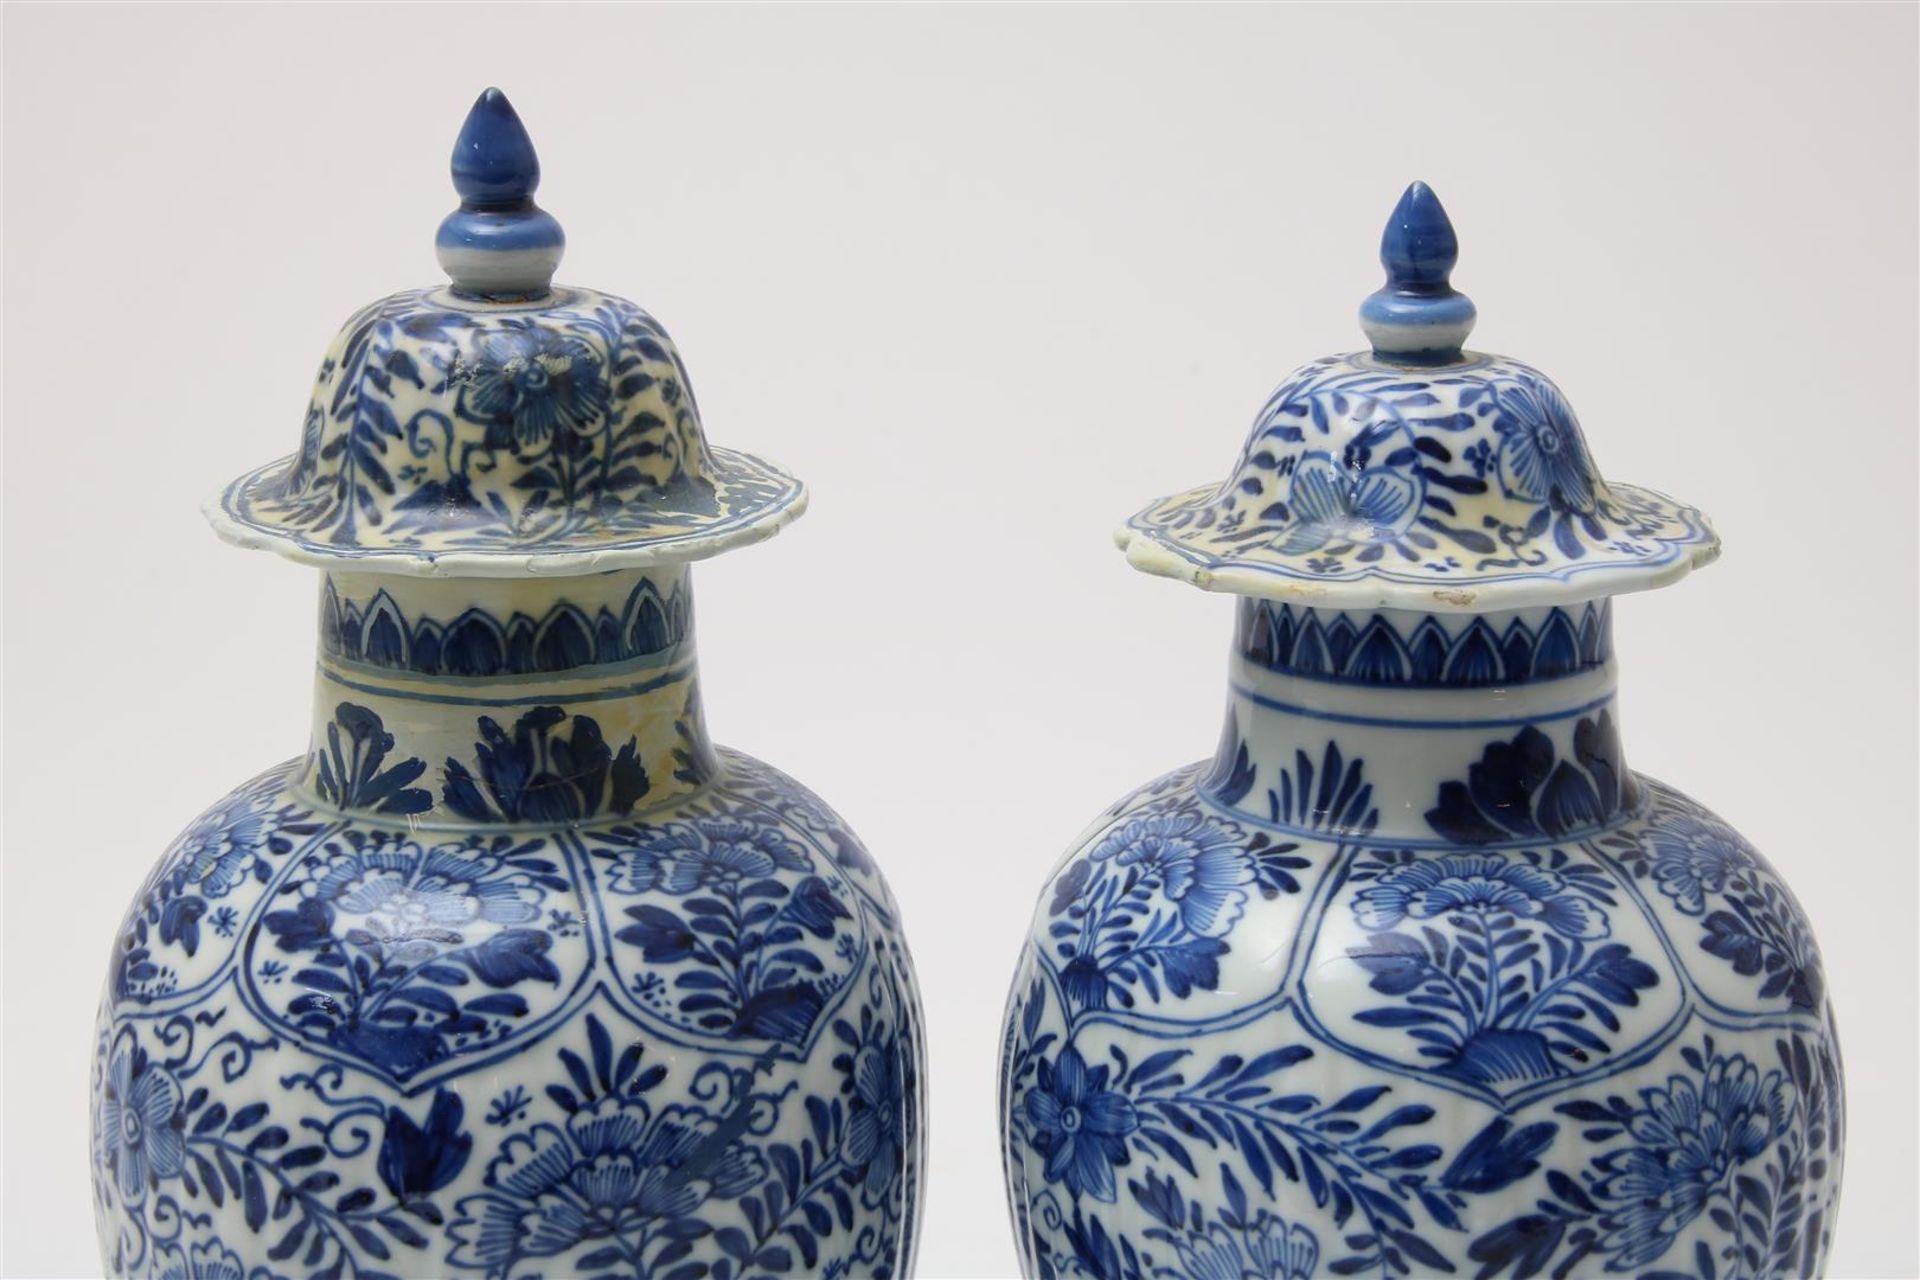 Set of porcelain baluster-shaped lidded vases with cartouches and flowering shrubs decoration, China - Image 2 of 9